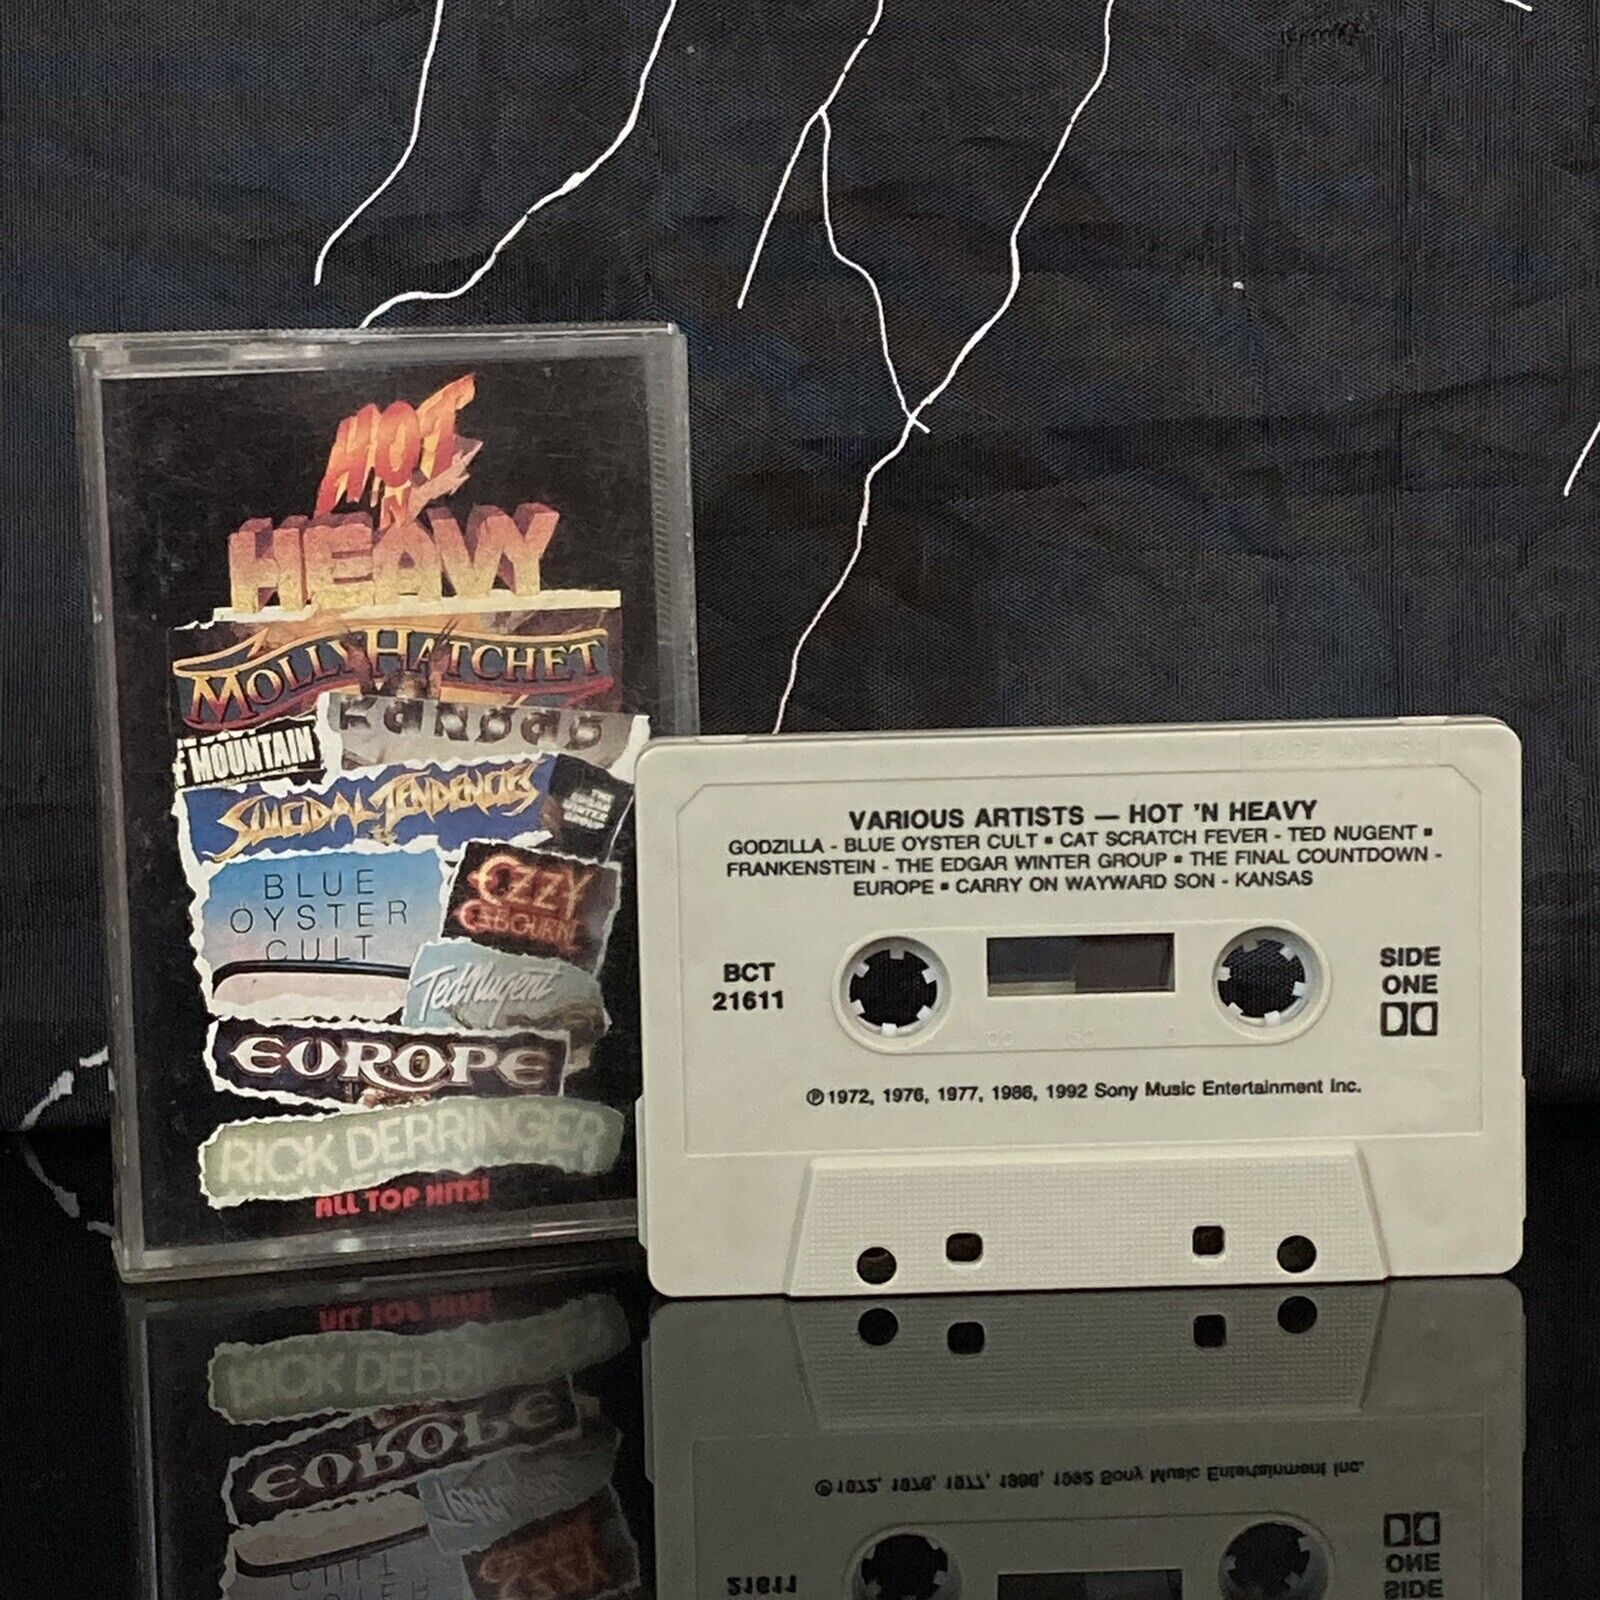 Hot ‘N Heavy - Various Artists - All Top Hits - Cassette Tape - 1991 Retro 🤘🏼